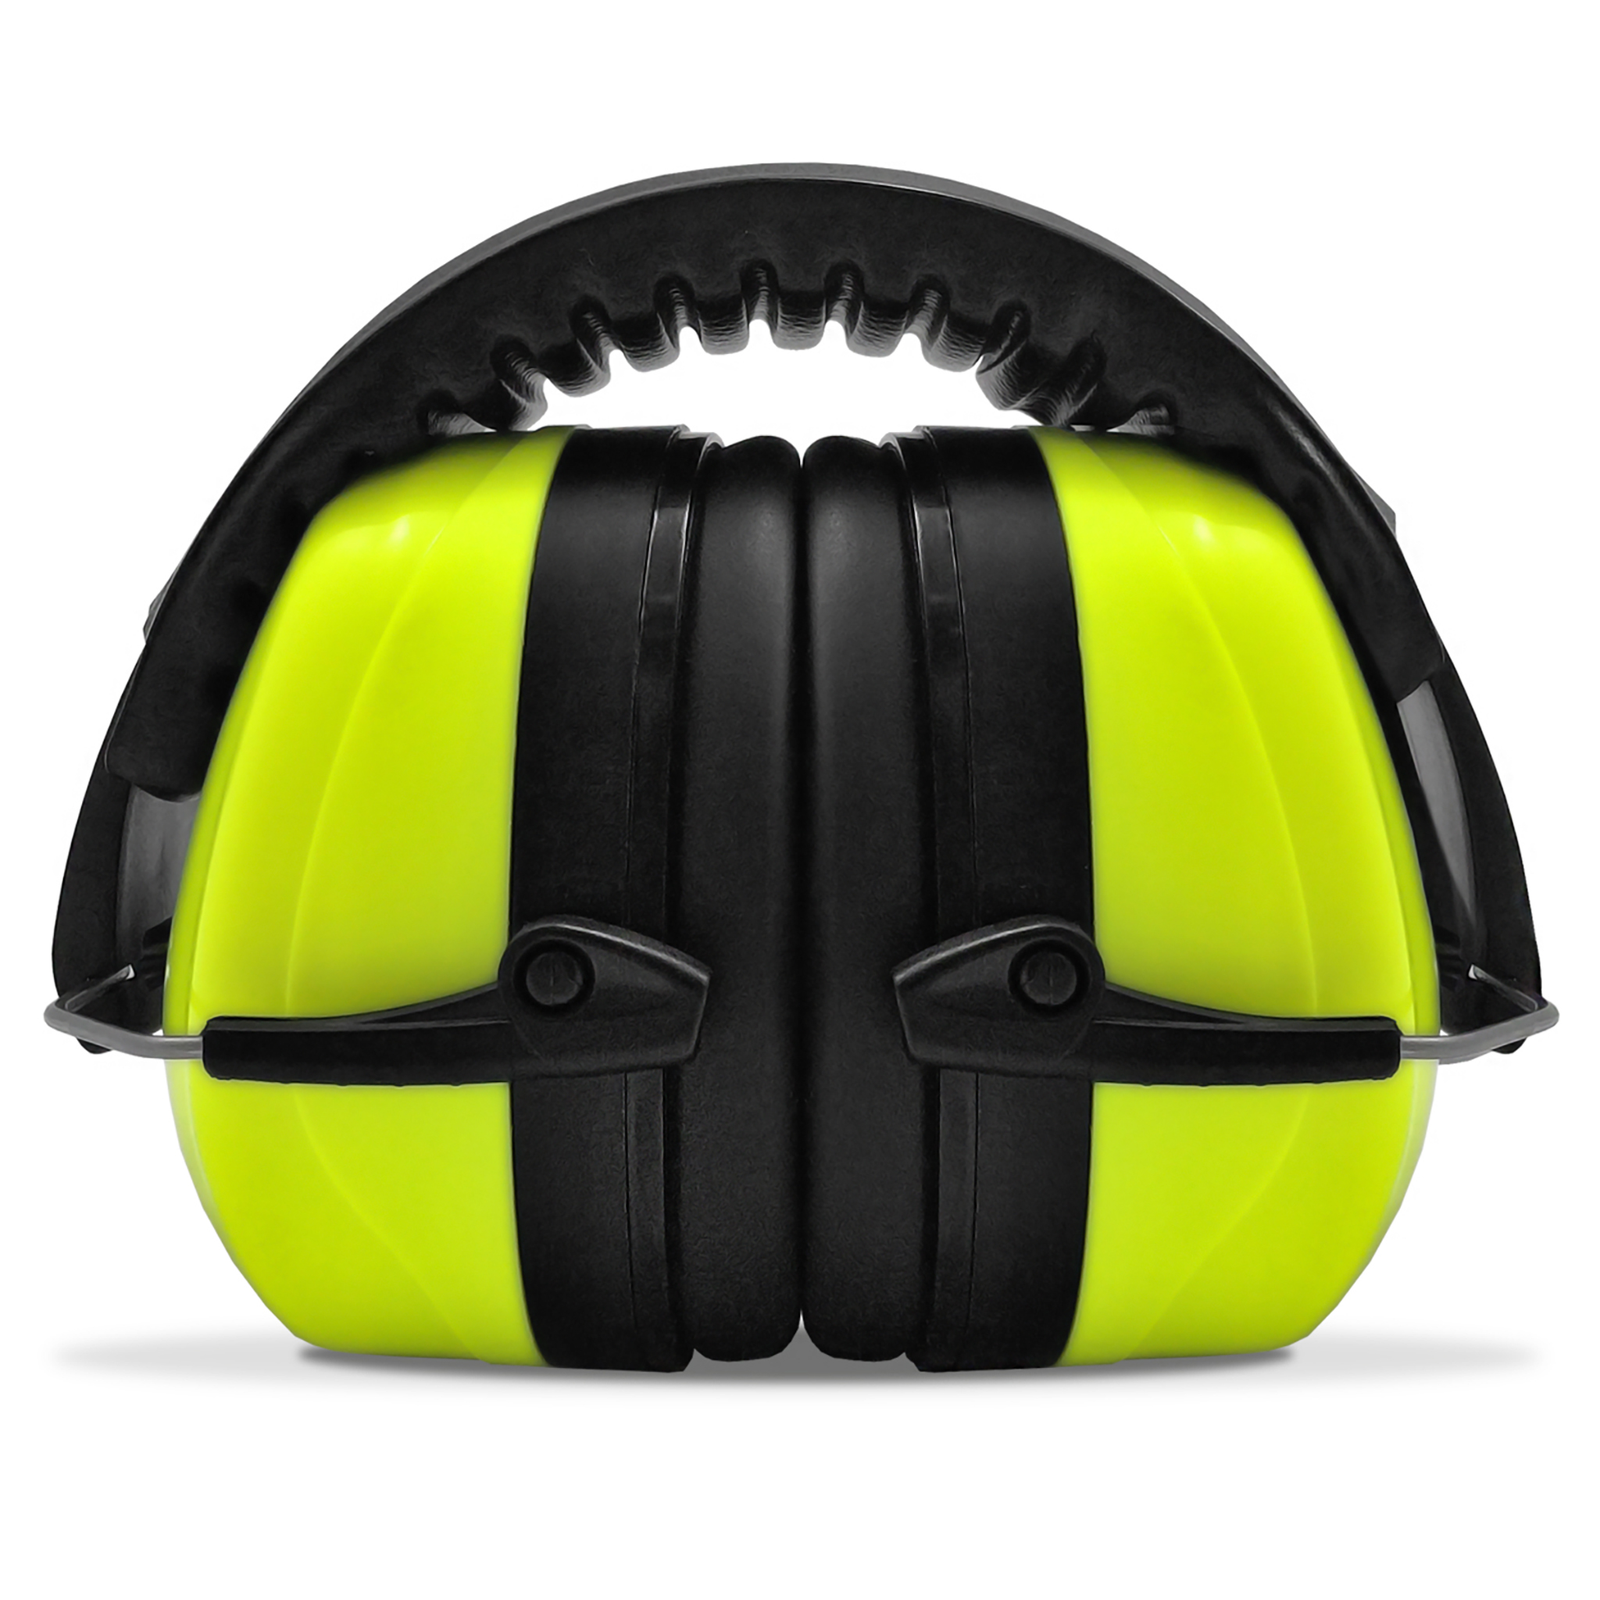 Front view of the 27DB NRR noise cancelling JORESTECH high visibility yellow earmuff over white background